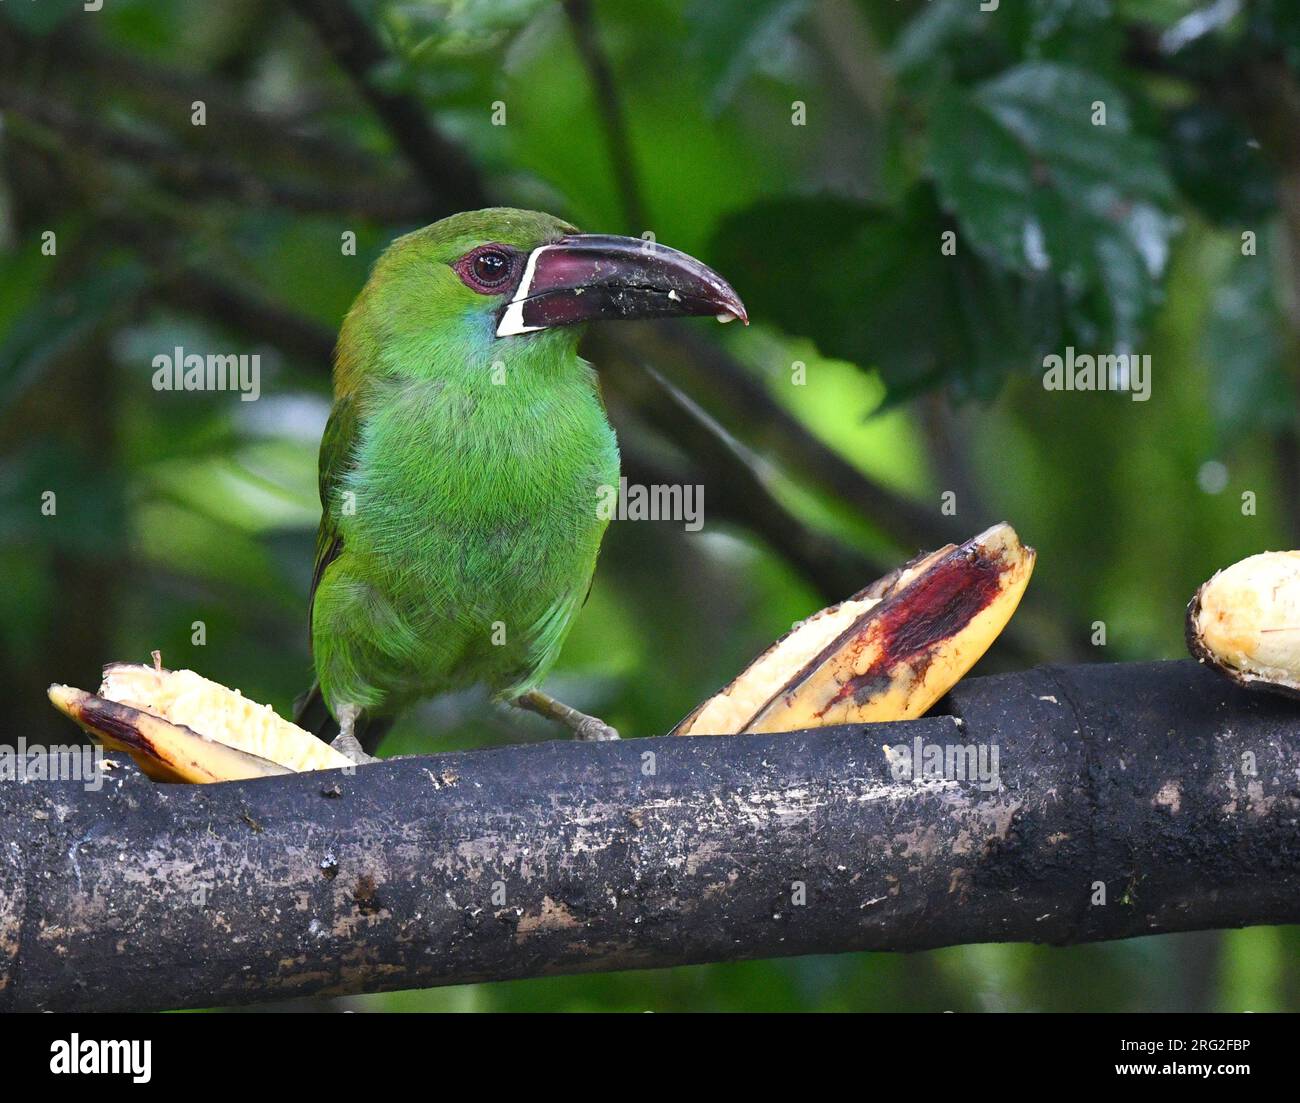 Crimson-rumped Toucanet, Aulacorhynchus haematopygus, in west andean slope of Ecuador. Perched on a banana feeder at a birding lodge. Stock Photo